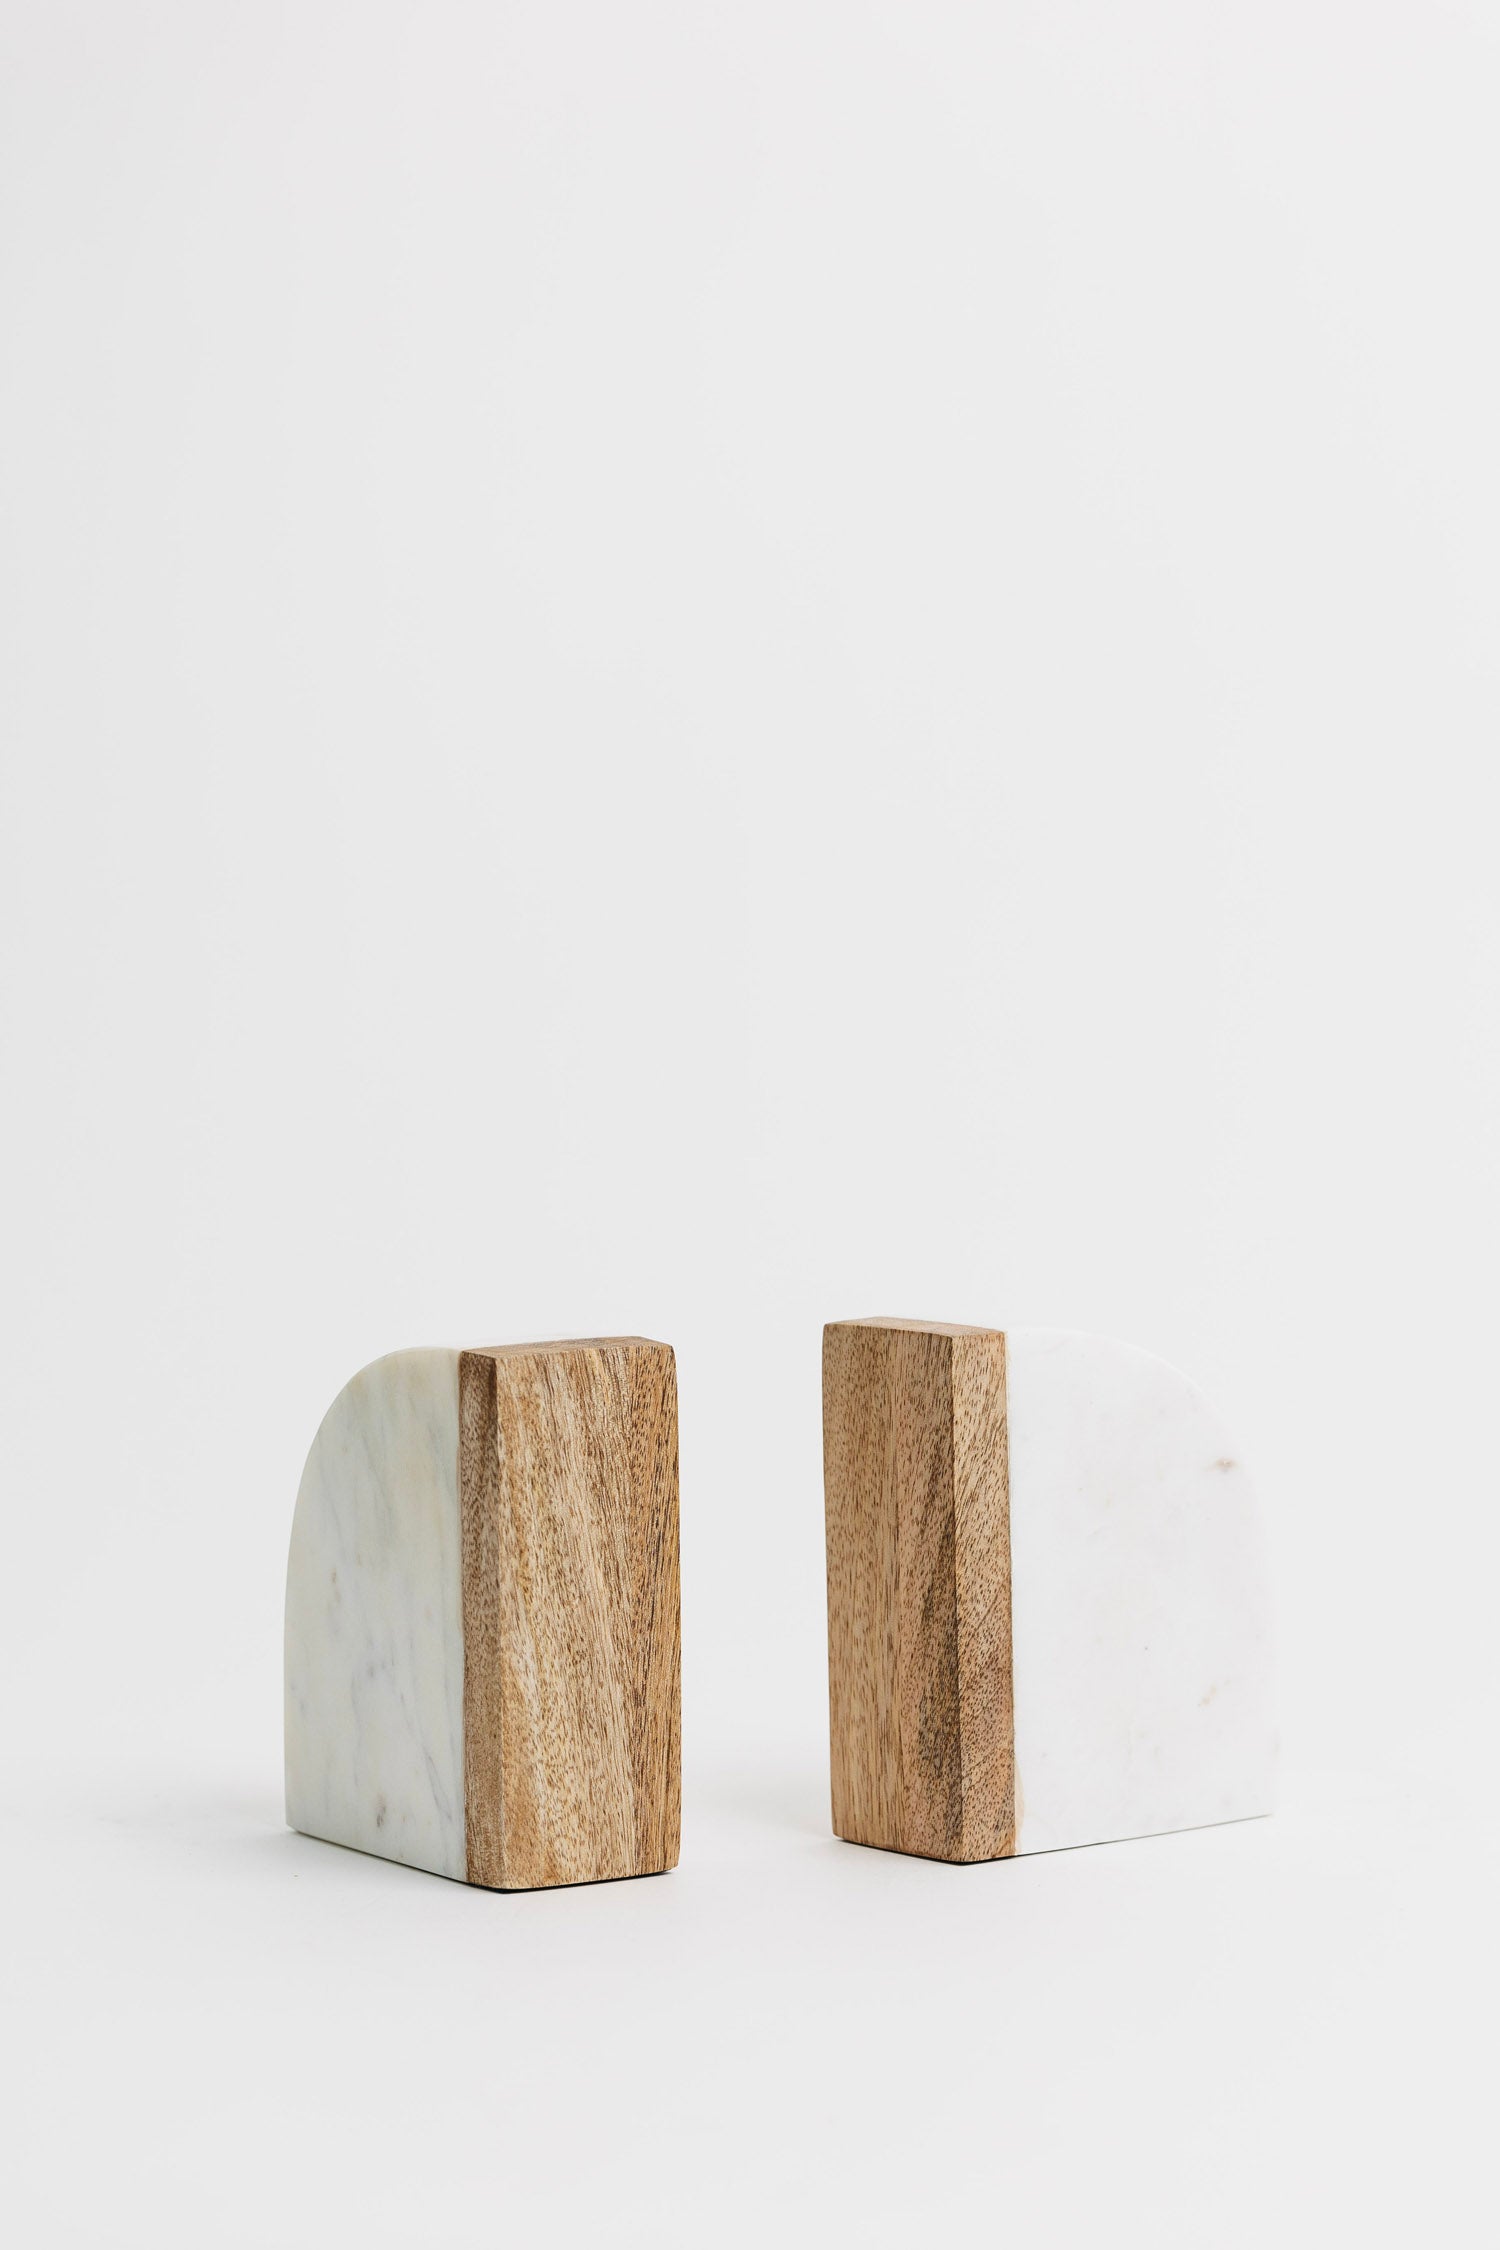 Crawford Marble + Wood Bookends - Set of 2